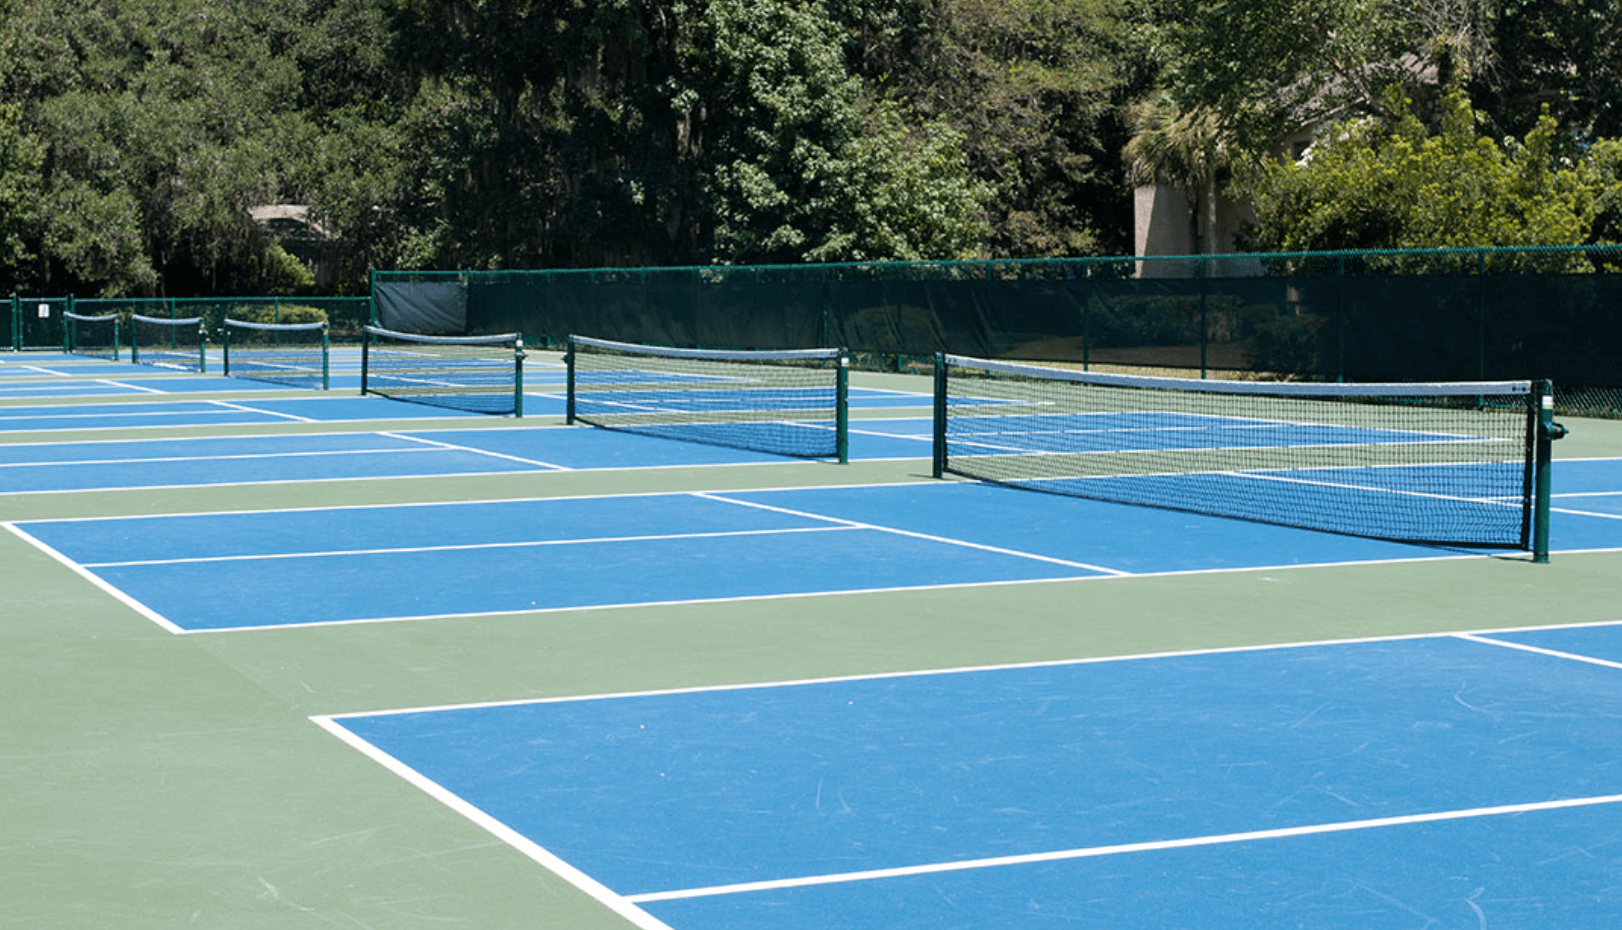 pickleball is the fastest growing sport in America